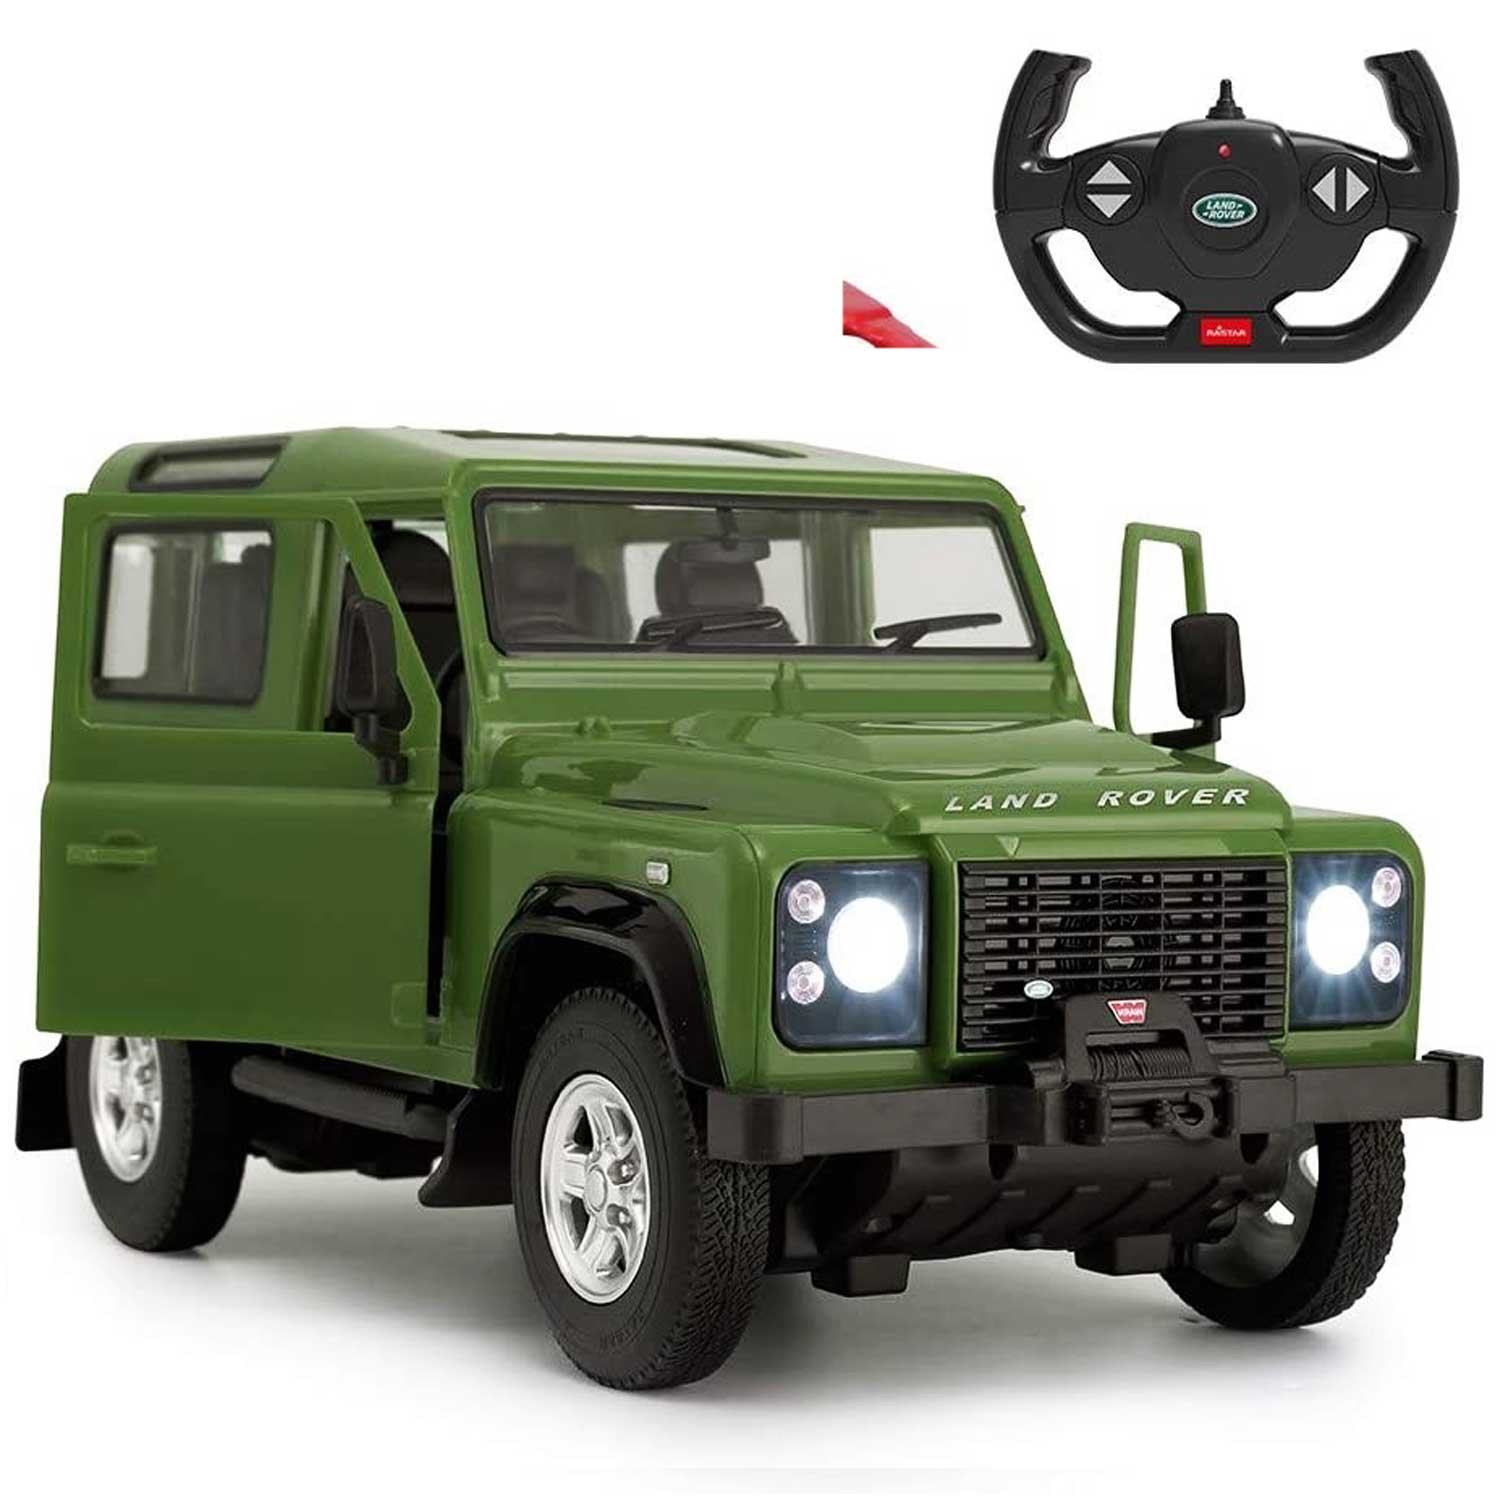 Toys RC LAND ROVER Defender With Radio Remote Control TOY Vehicle for Kids